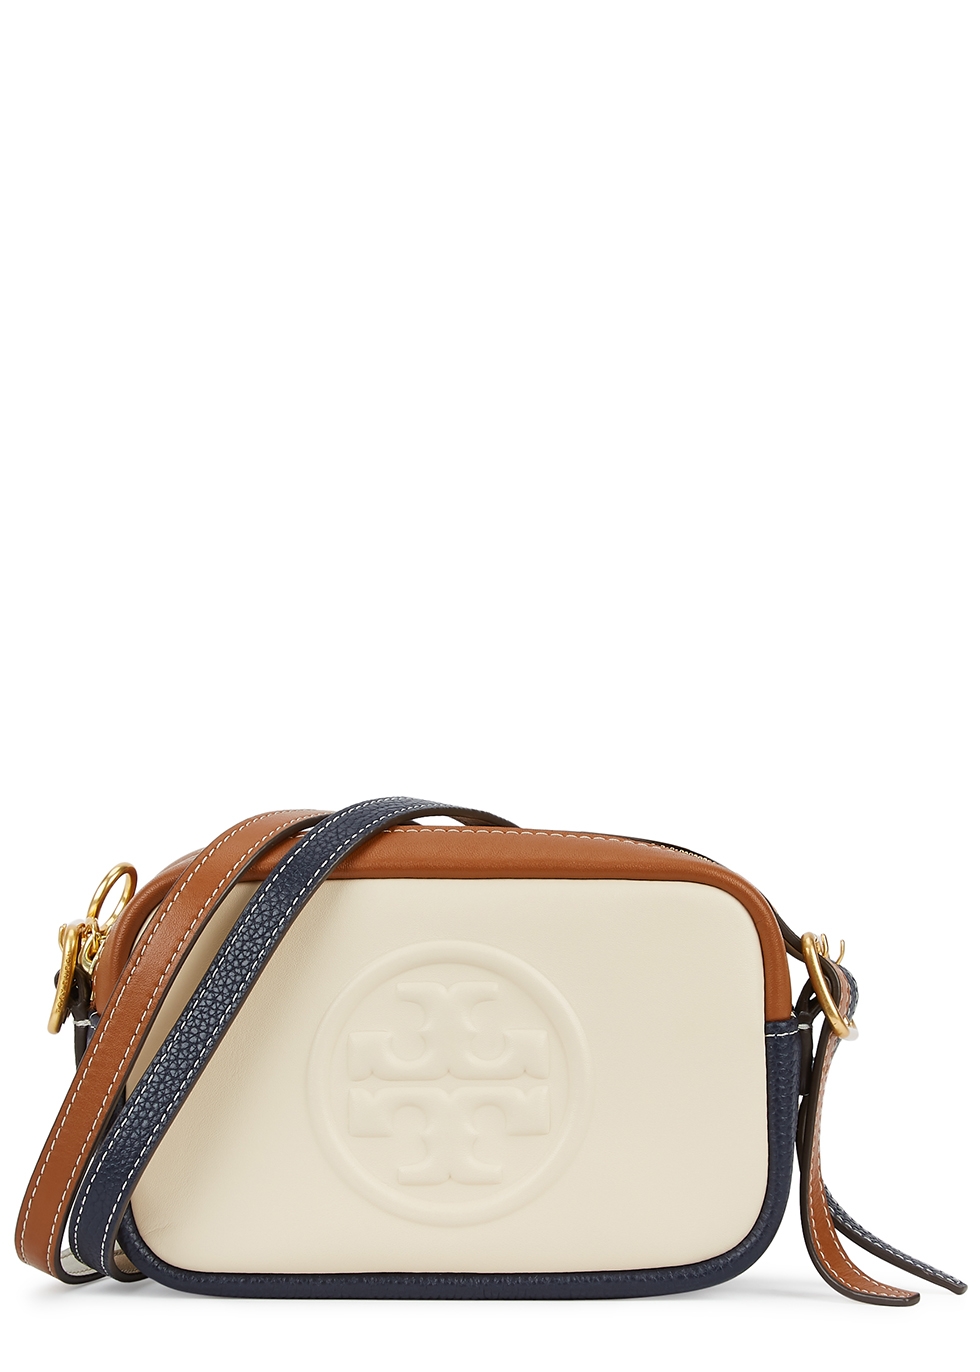 Perry cream panelled leather cross-body bag